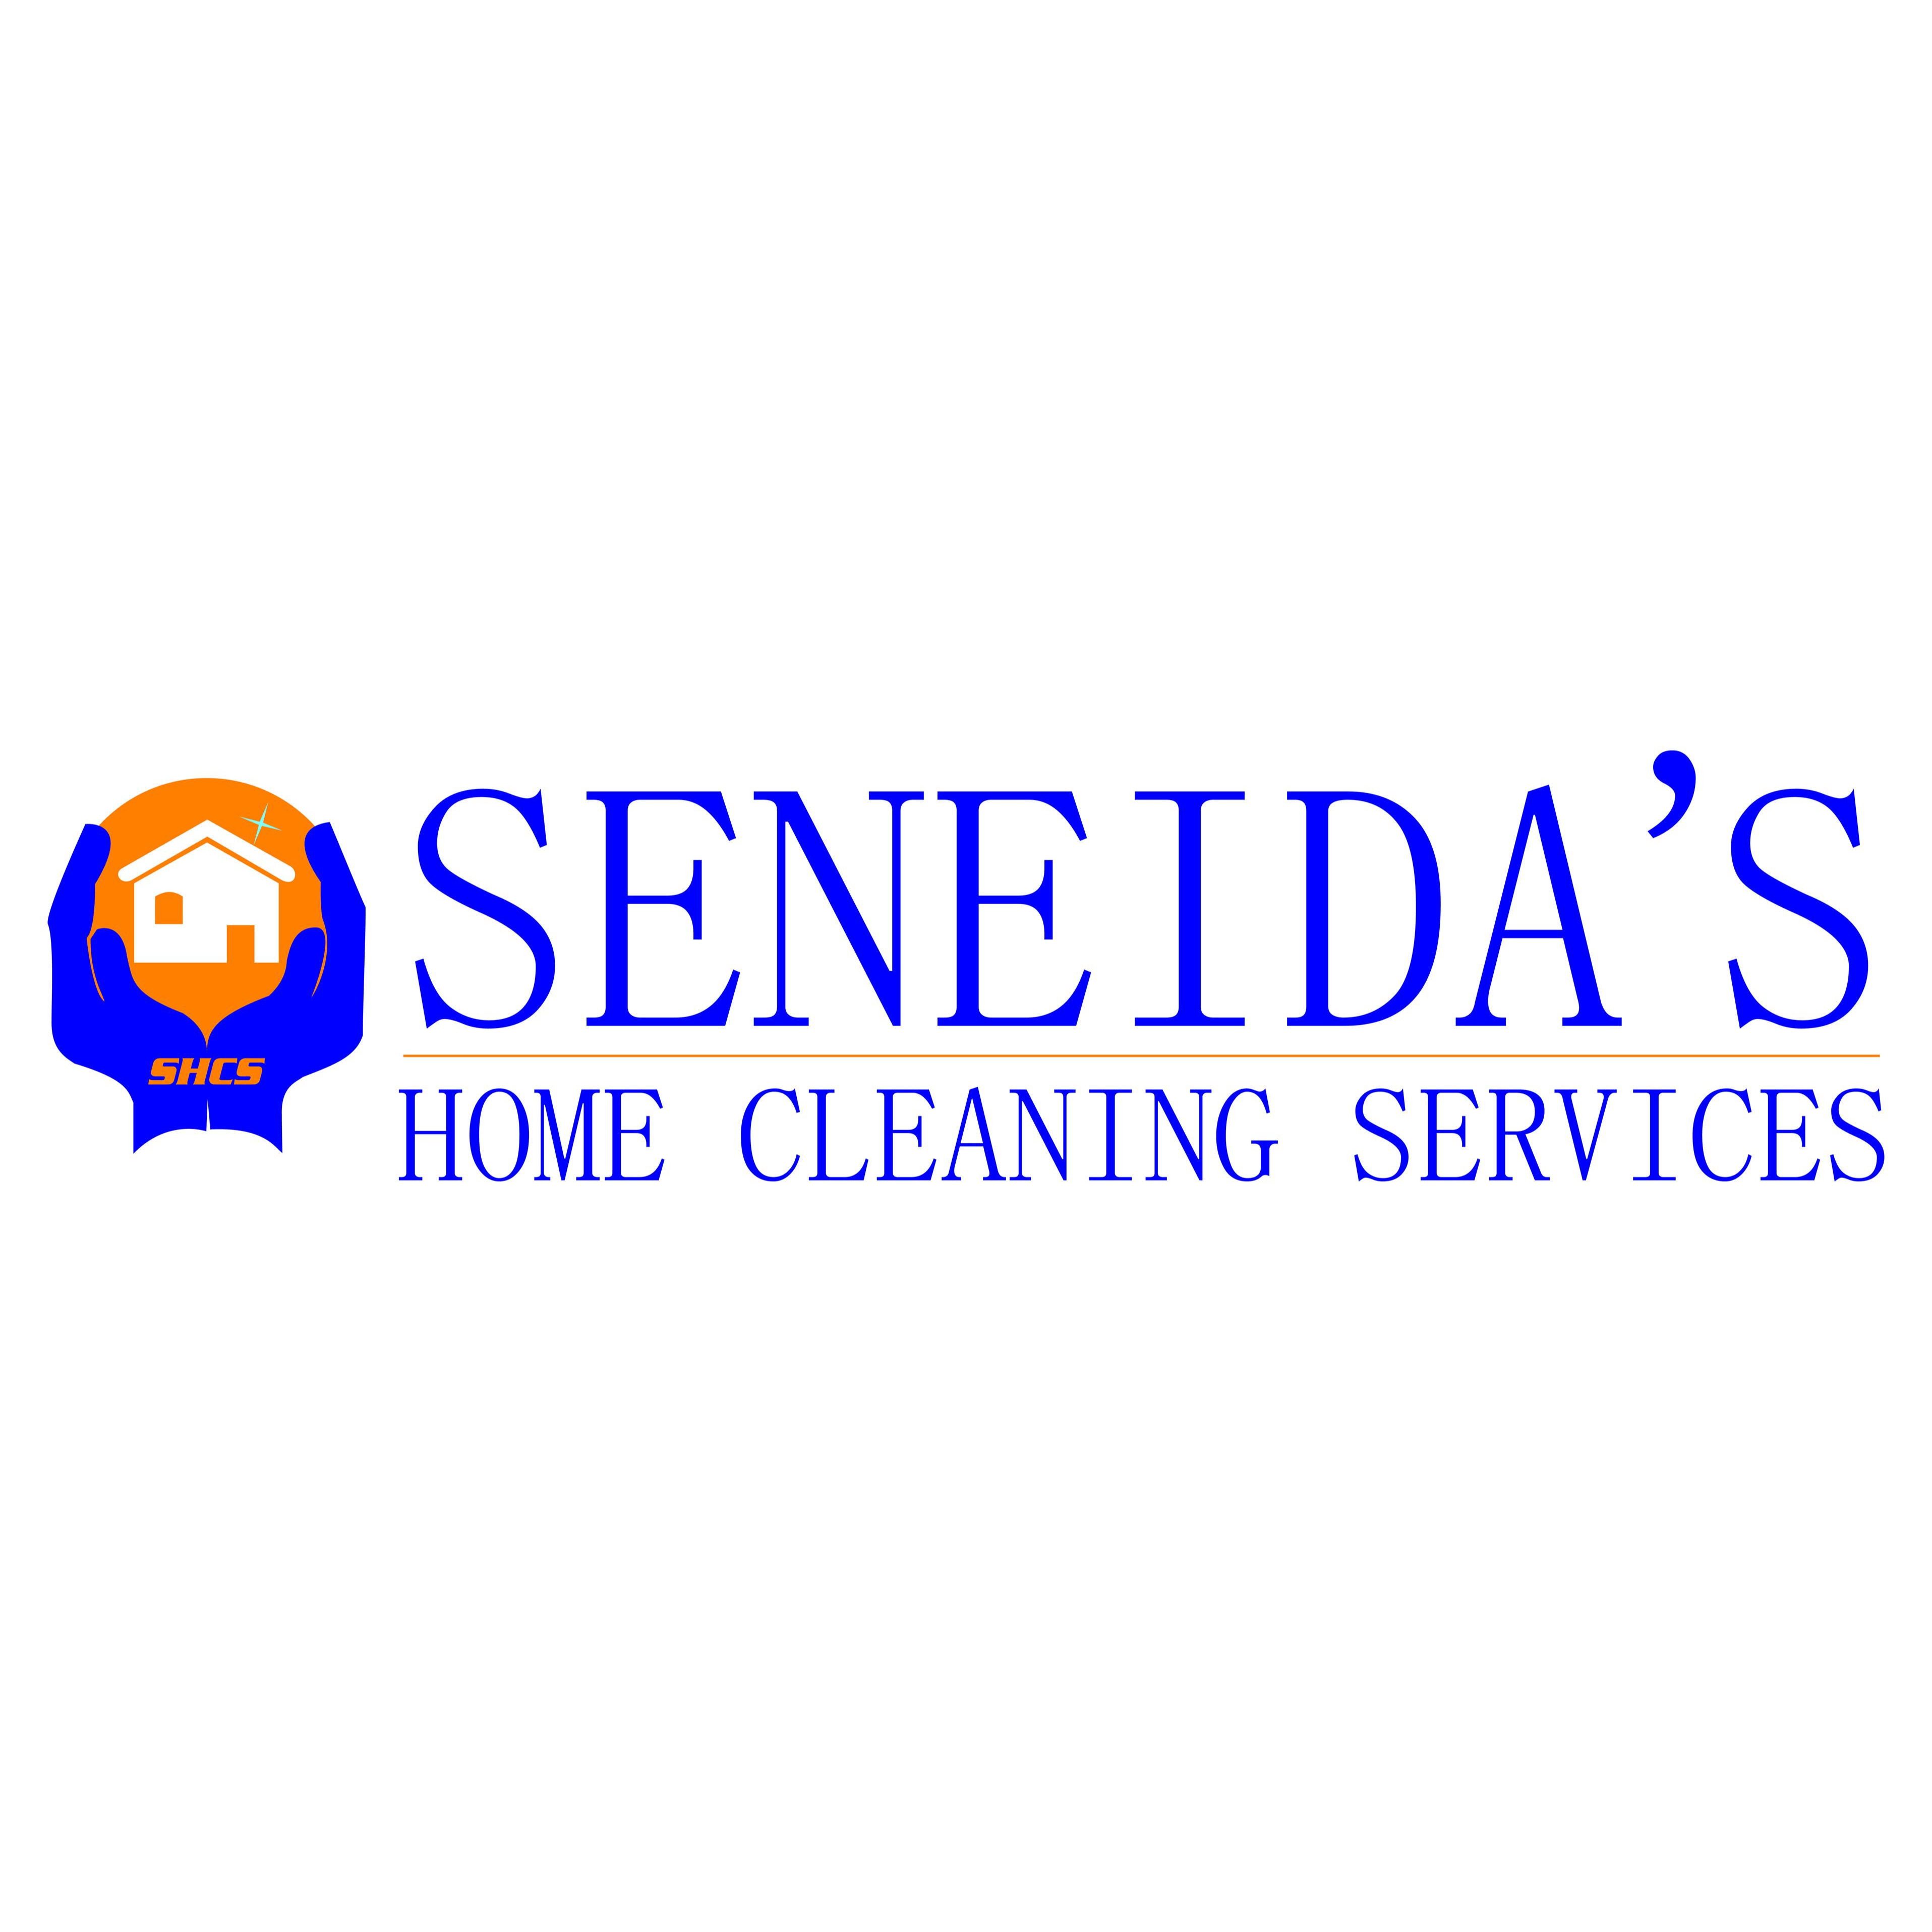 Seneida's Home Cleaning Services of Union County